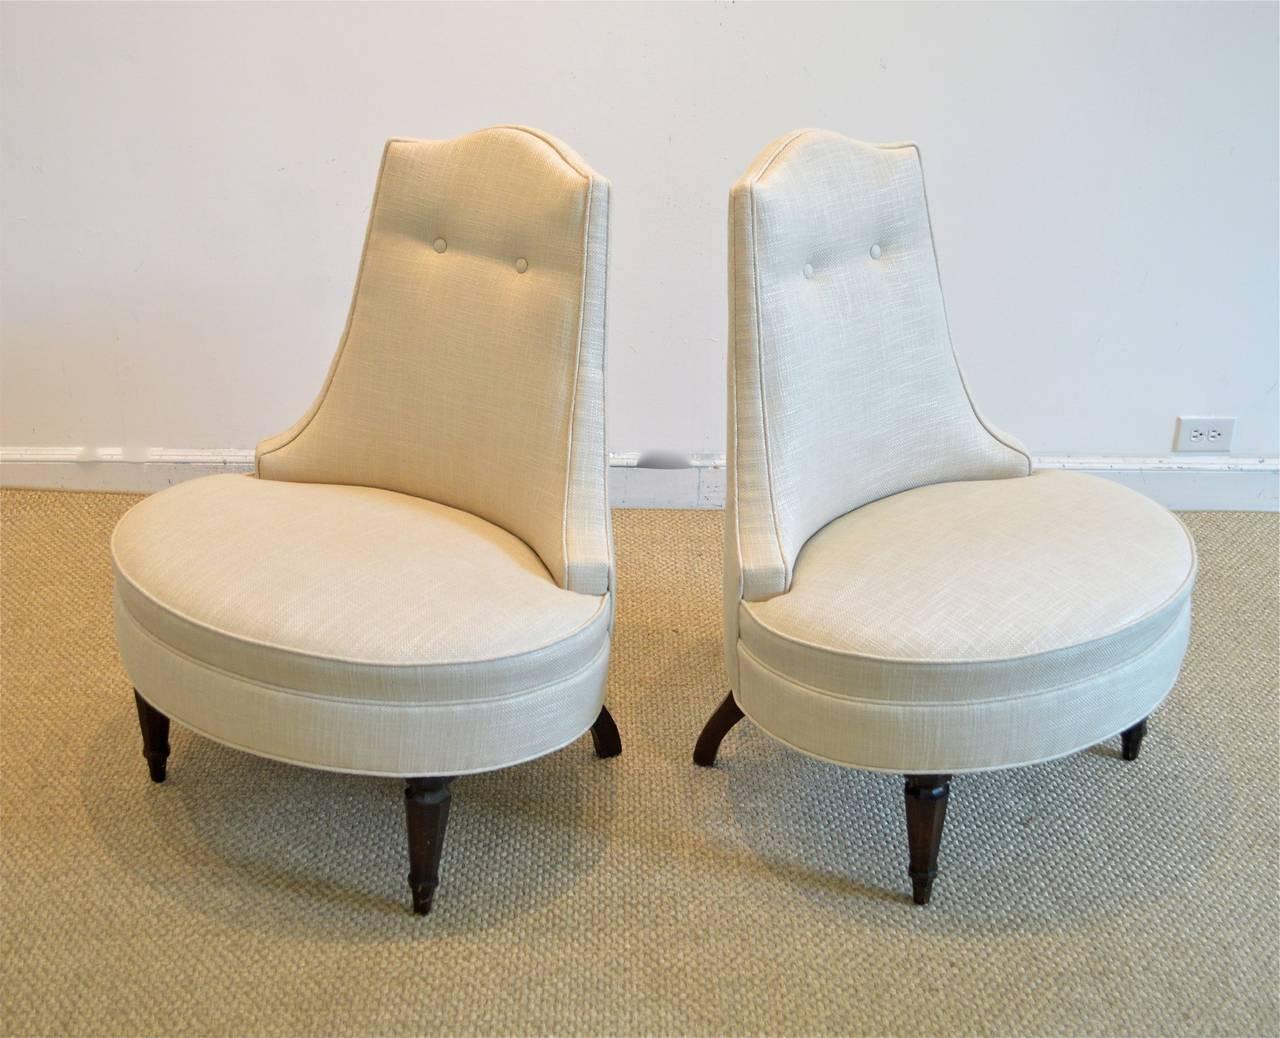 American Pair of Hollywood Regency Style Lounge Chairs